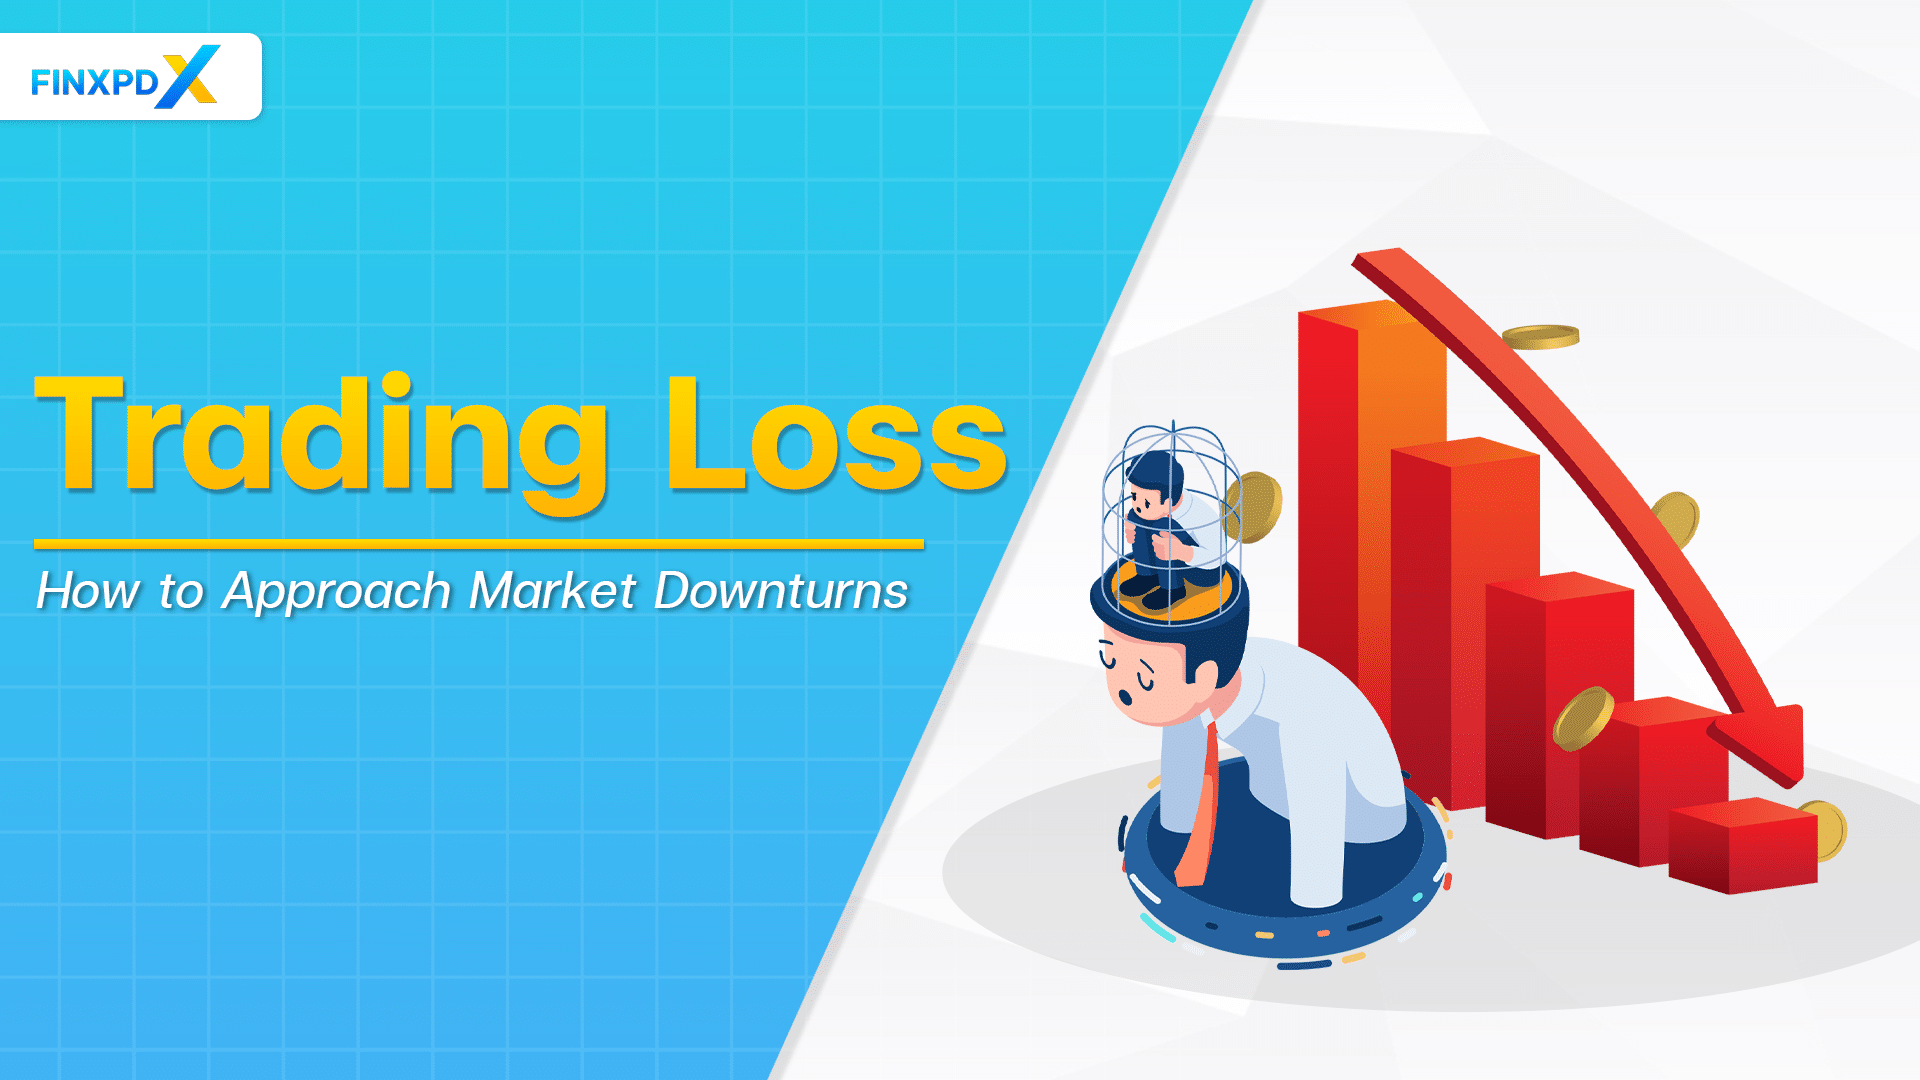 Trading Loss: How to Approach Market Downturns